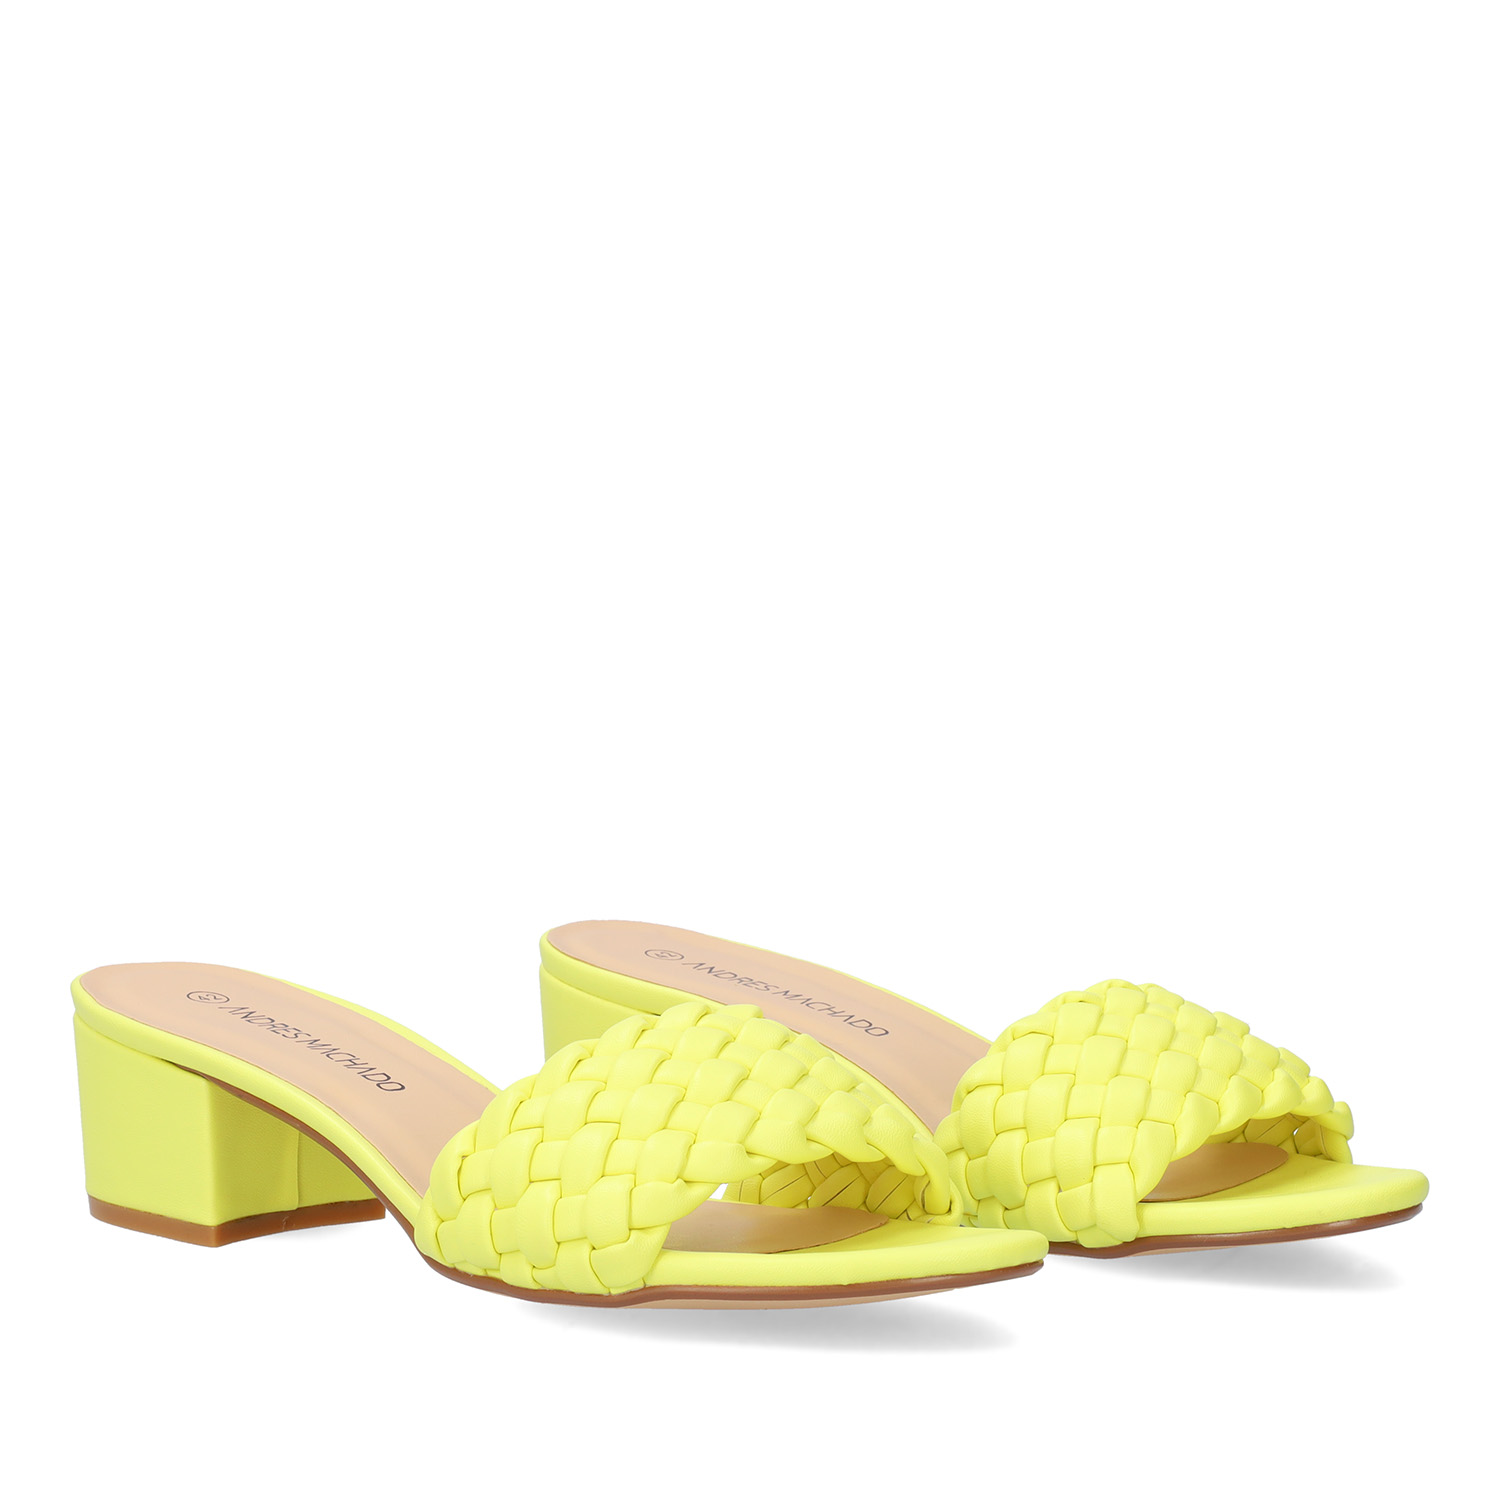 Squared heel mule in soft neon yellow material 